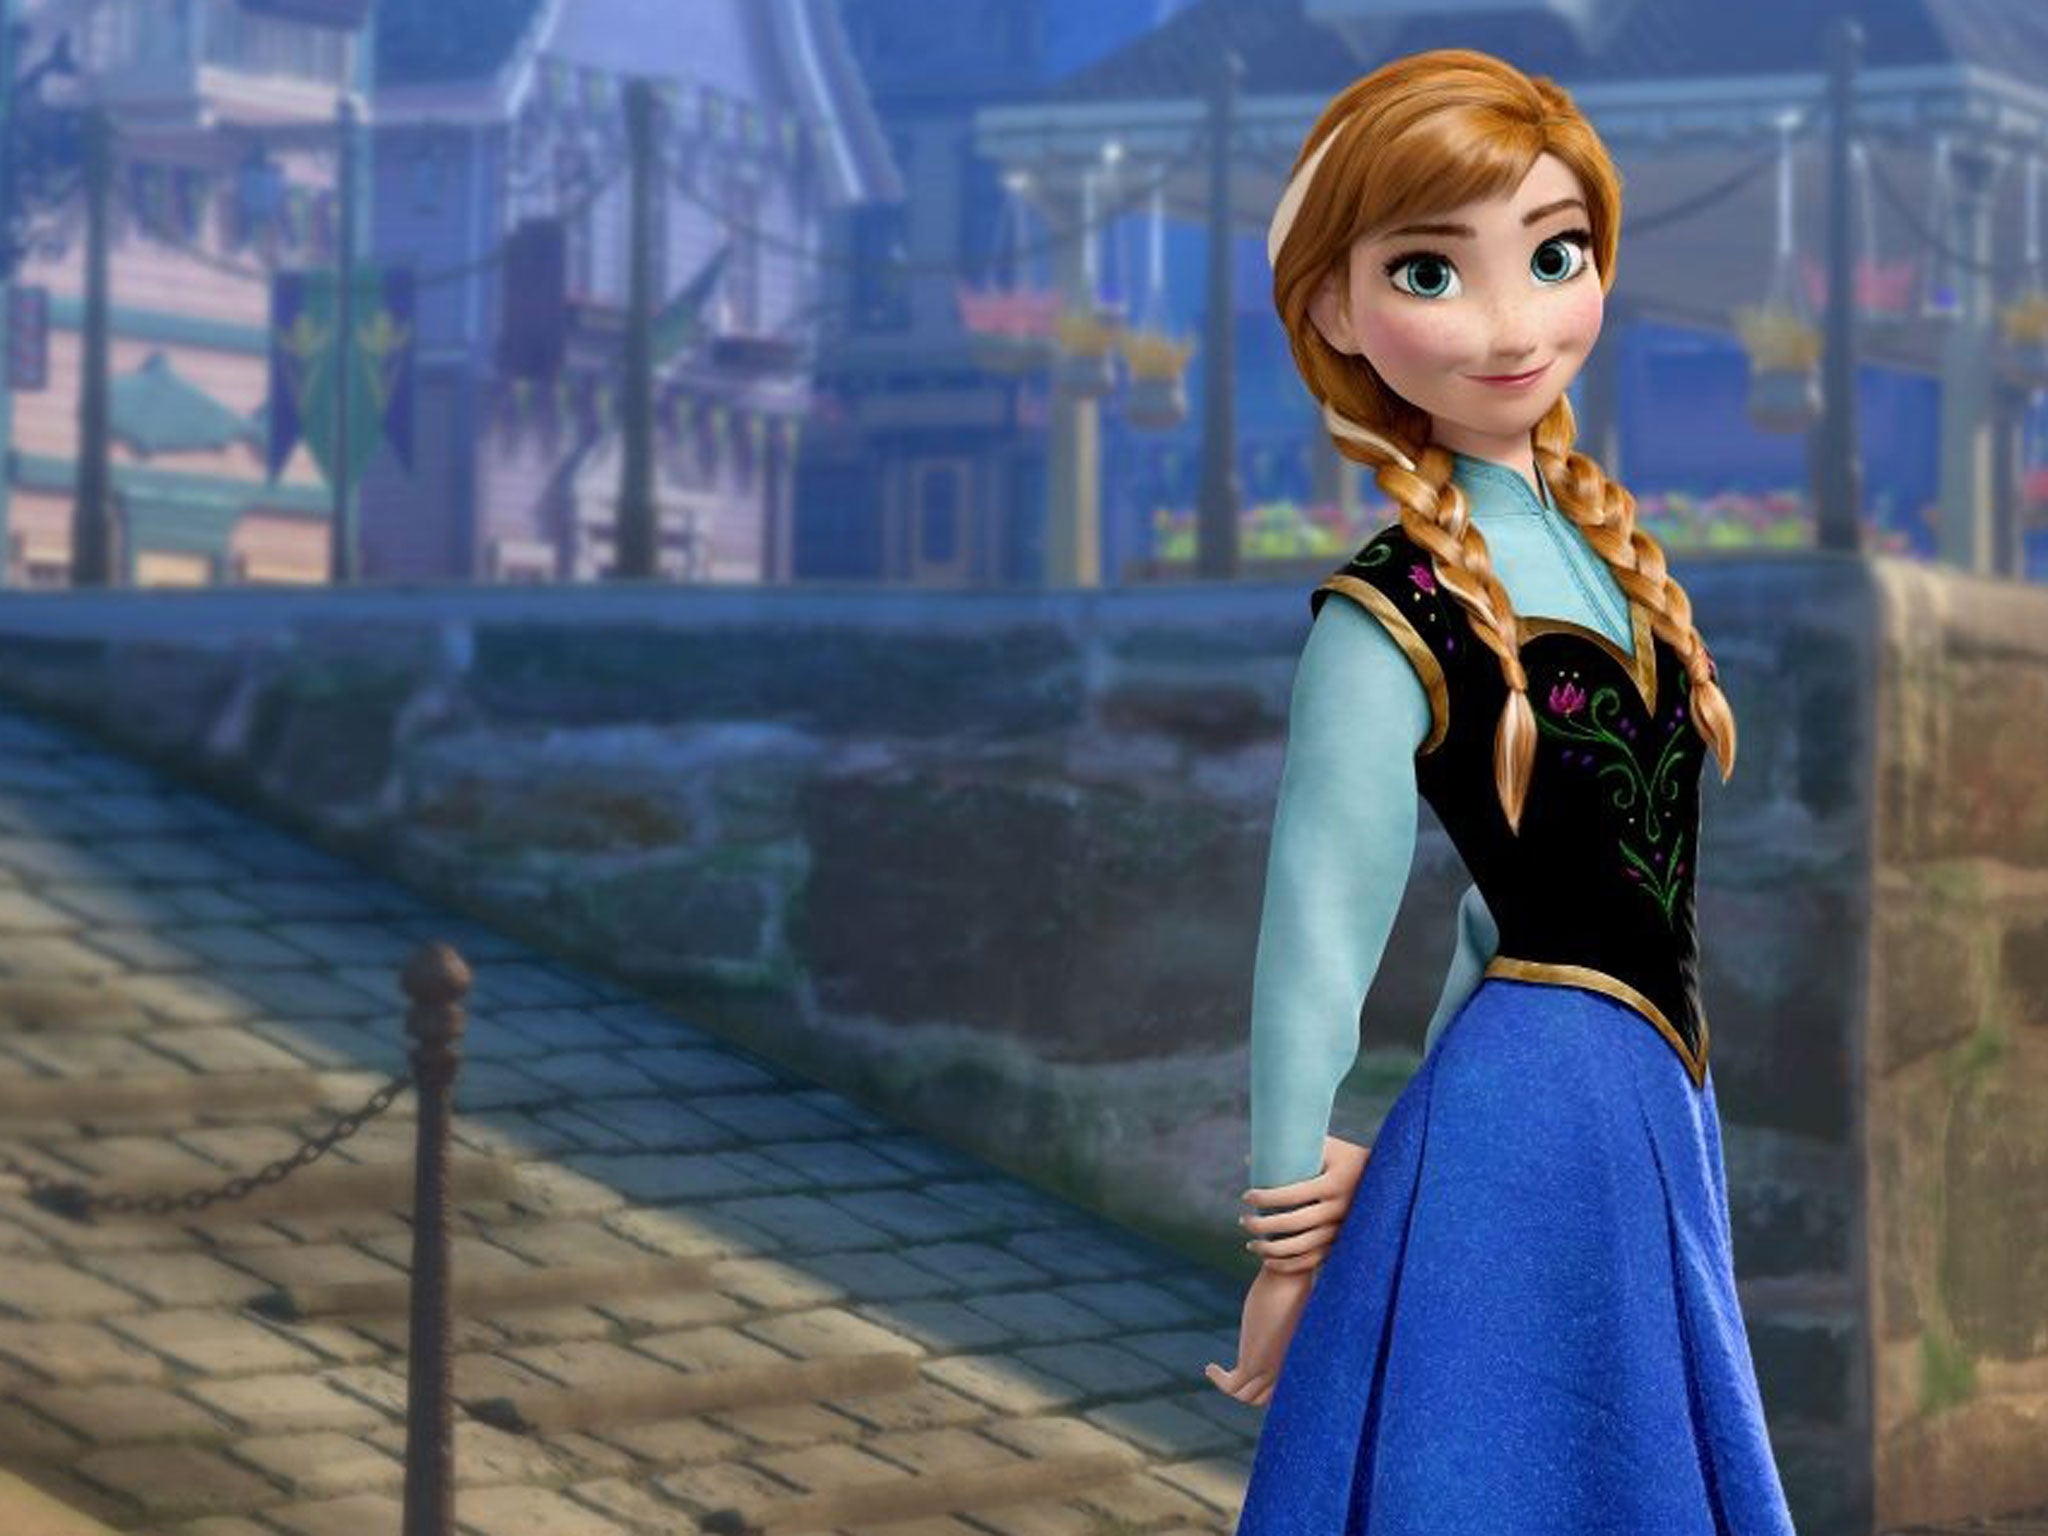 Frozen heroine Anna has eyes that are bigger than her wrists - a distortion that could harm girls' self-esteem